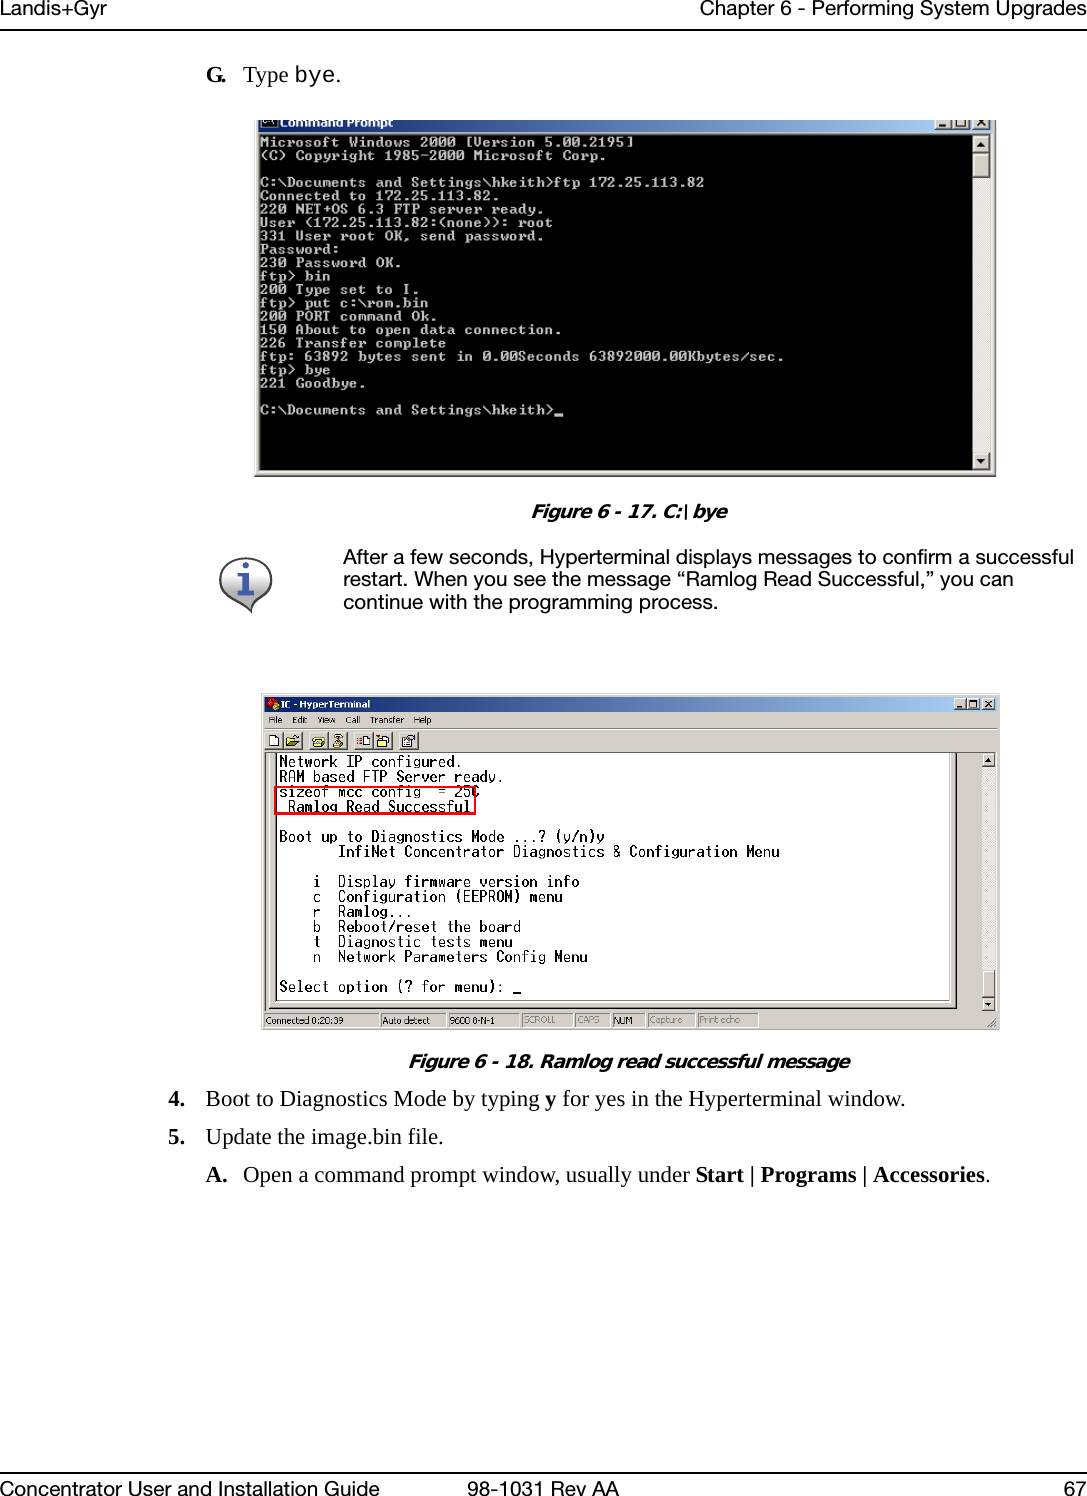 Landis+Gyr Chapter 6 - Performing System UpgradesConcentrator User and Installation Guide 98-1031 Rev AA 67G. Type bye.Figure 6 - 17. C:\byeFigure 6 - 18. Ramlog read successful message4. Boot to Diagnostics Mode by typing y for yes in the Hyperterminal window.5. Update the image.bin file.A. Open a command prompt window, usually under Start | Programs | Accessories.After a few seconds, Hyperterminal displays messages to confirm a successful restart. When you see the message “Ramlog Read Successful,” you can continue with the programming process.